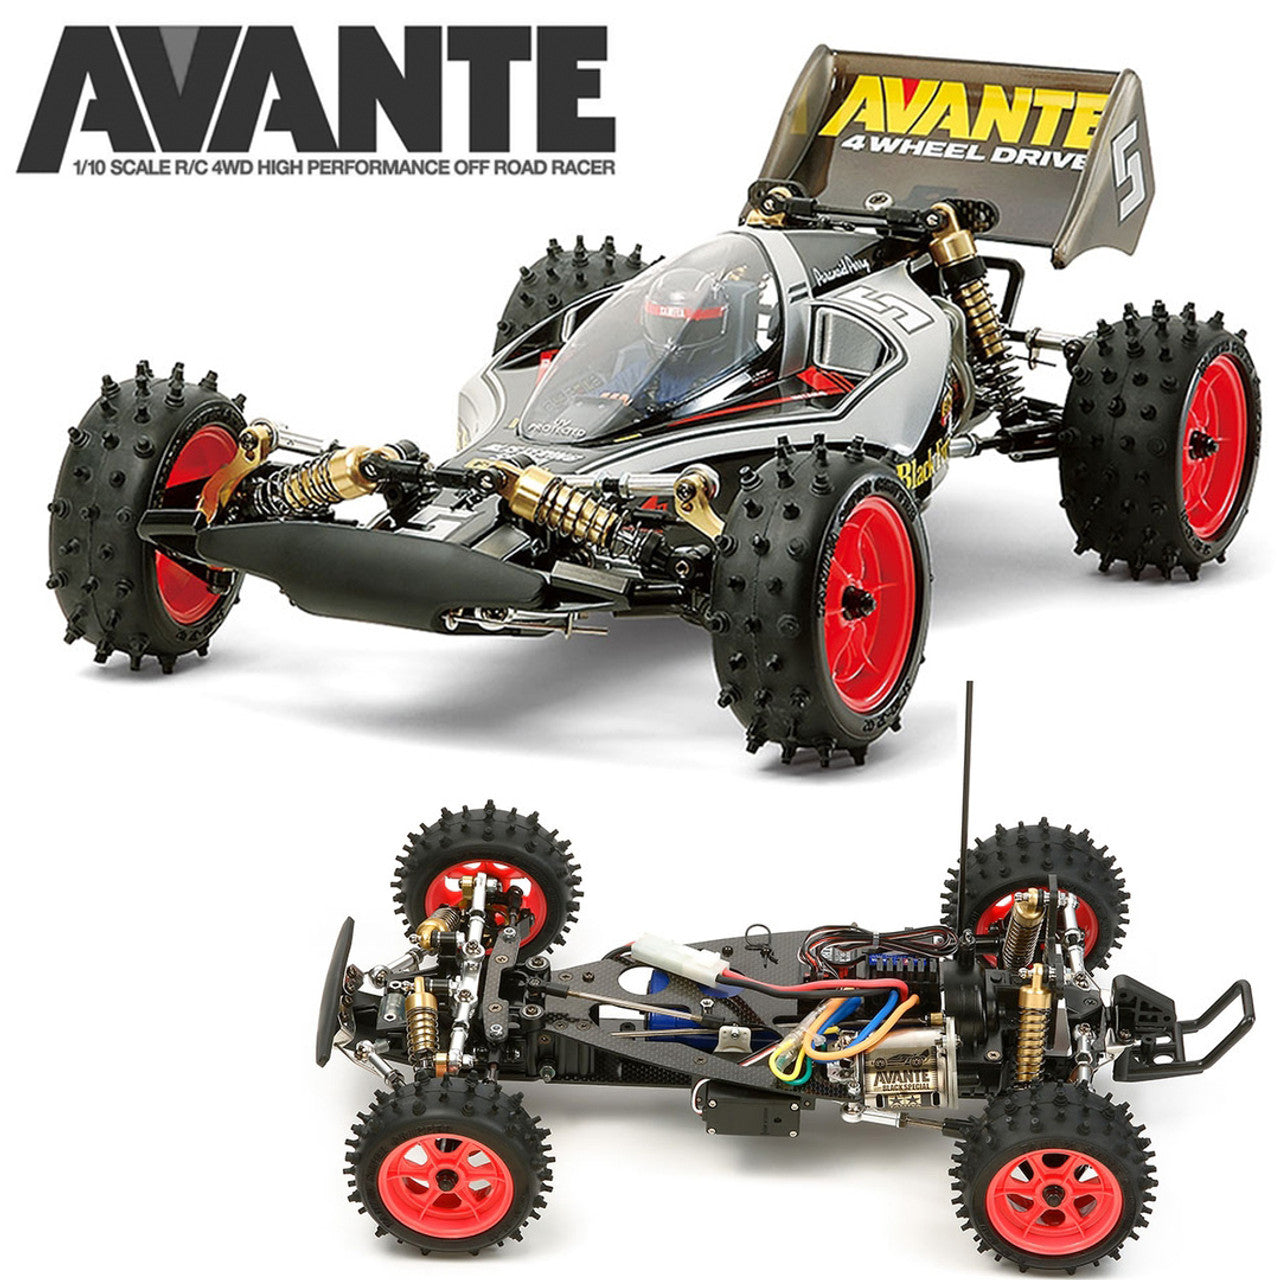 Tamiya 1/10 Avante 2011 Special Black Limited Edition 4WD Buggy Kit